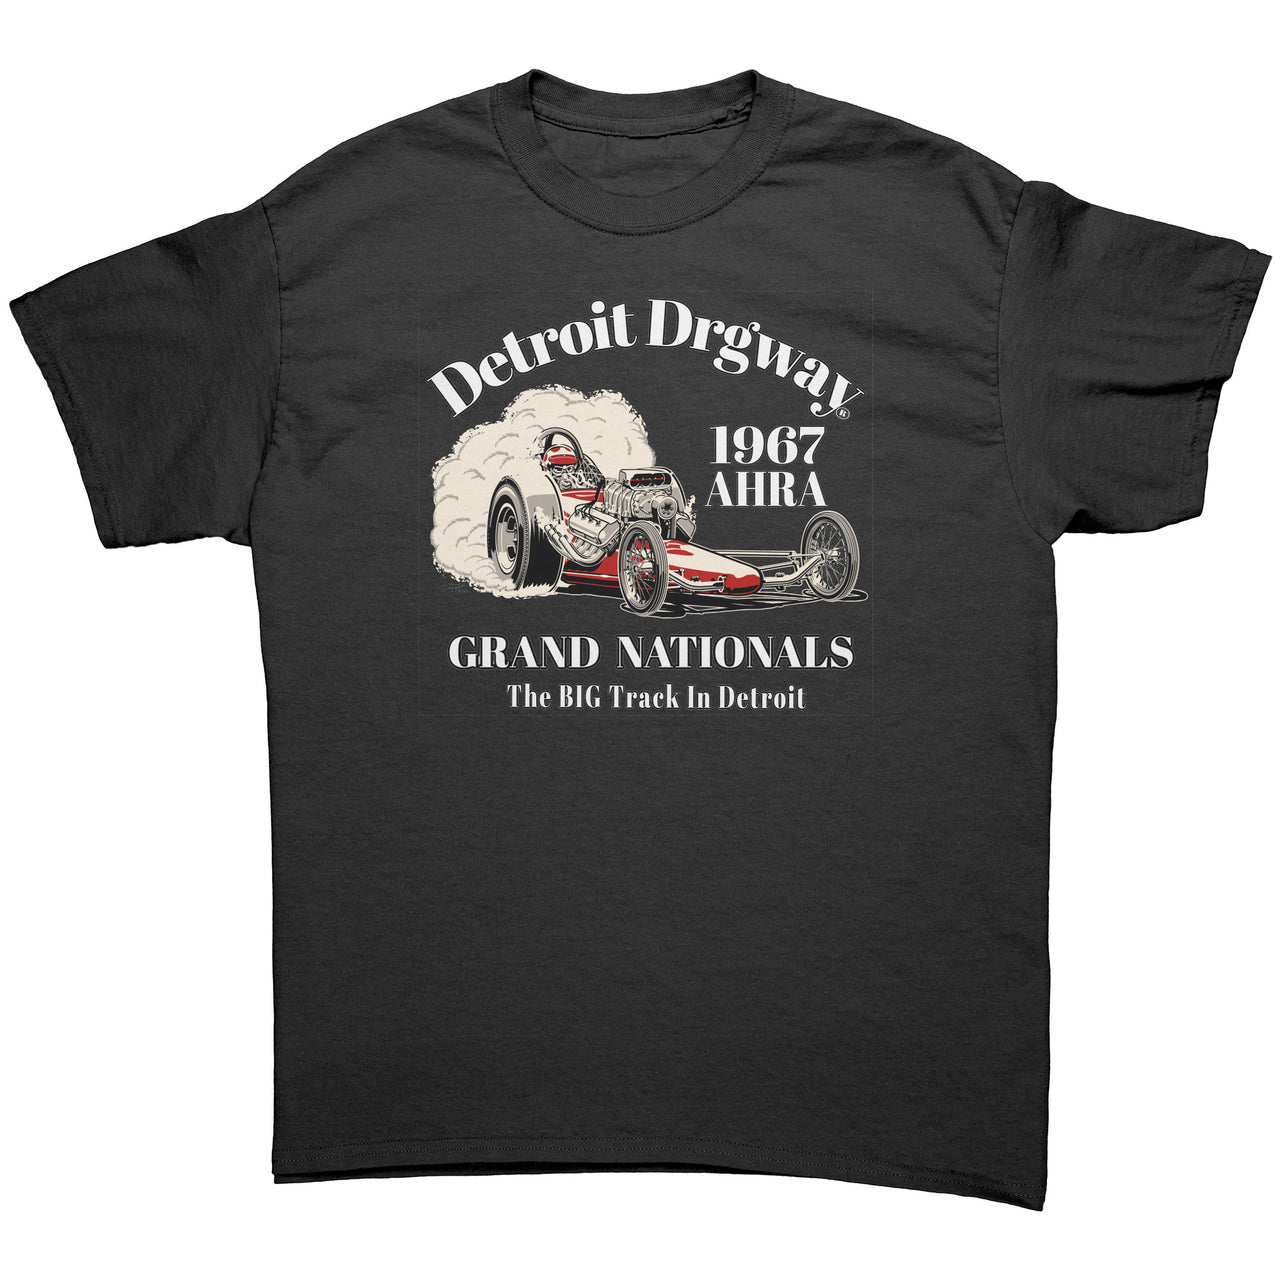 Detroit Dragway® 1967 Grand Nationals Short Sleeve T-Shirt Image On Front